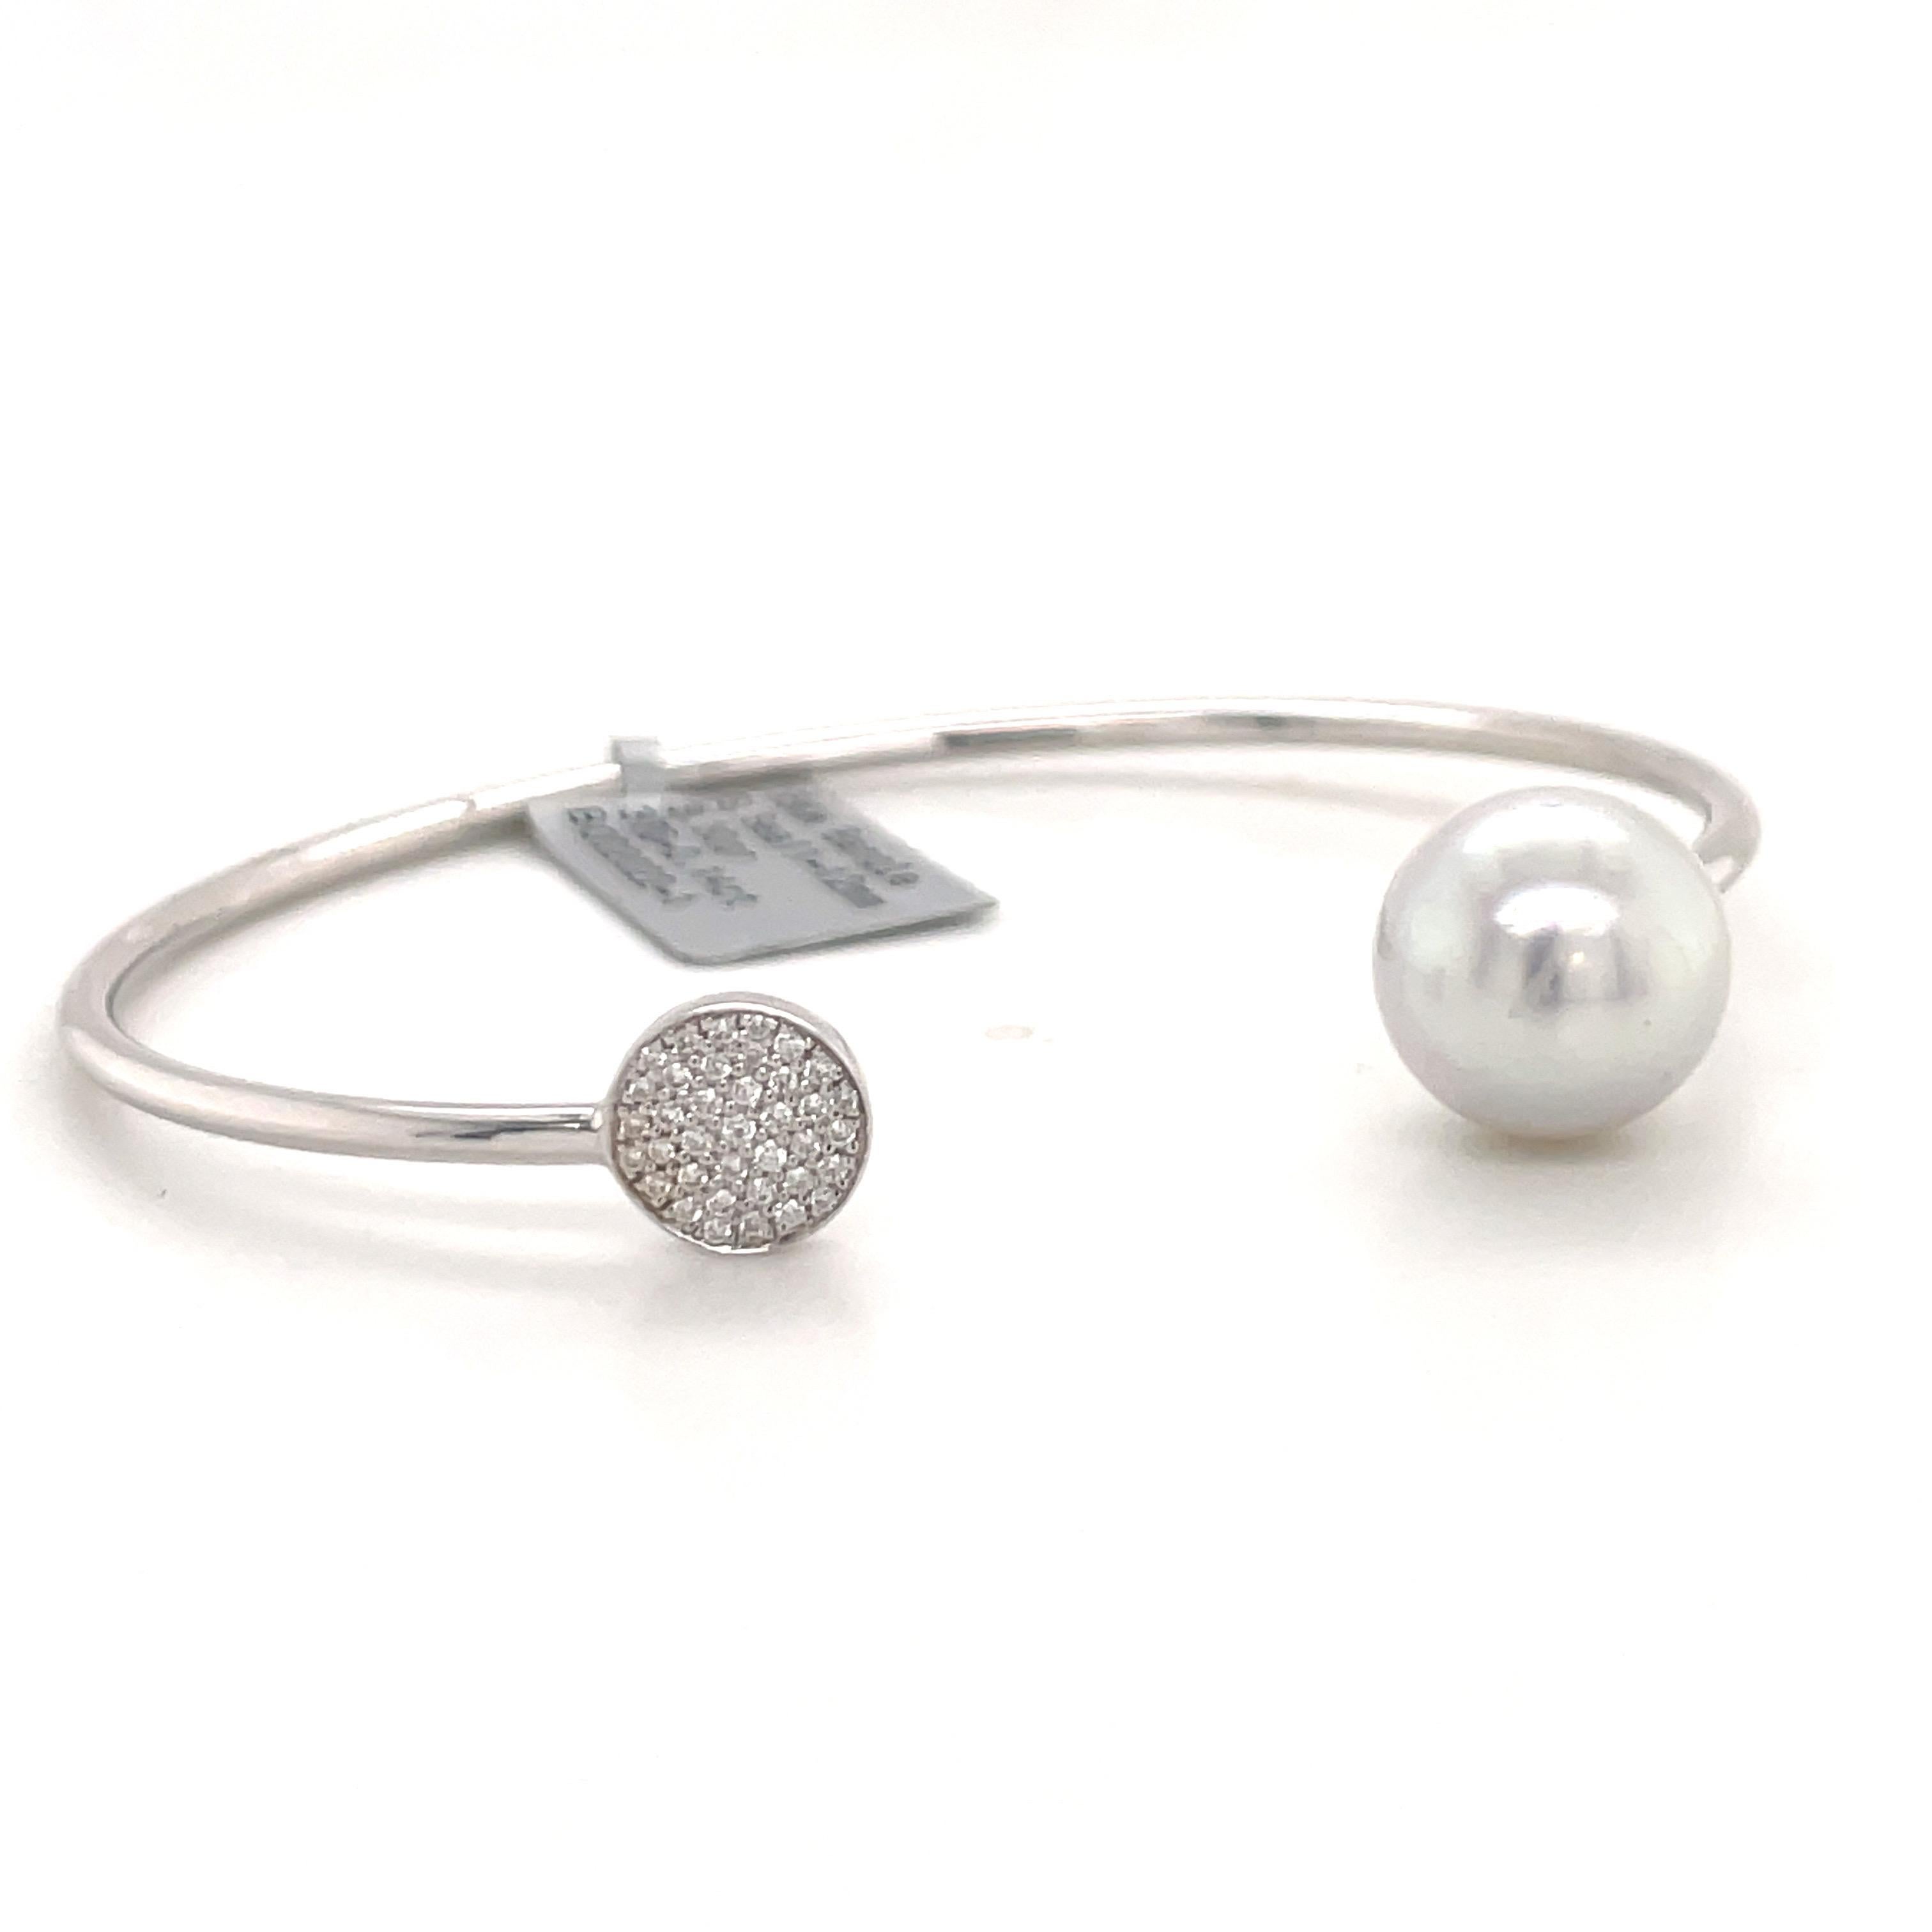 18 Karat White gold bangle bracelet featuring one South Sea Pearl measuring 11-12 MM with a diamond decorative circle containing 37 round brilliants 0.13 carats.
Color G-H
Clarity SI
Pearl can be changed to Tahitian, Pink Freshwater, Golden South